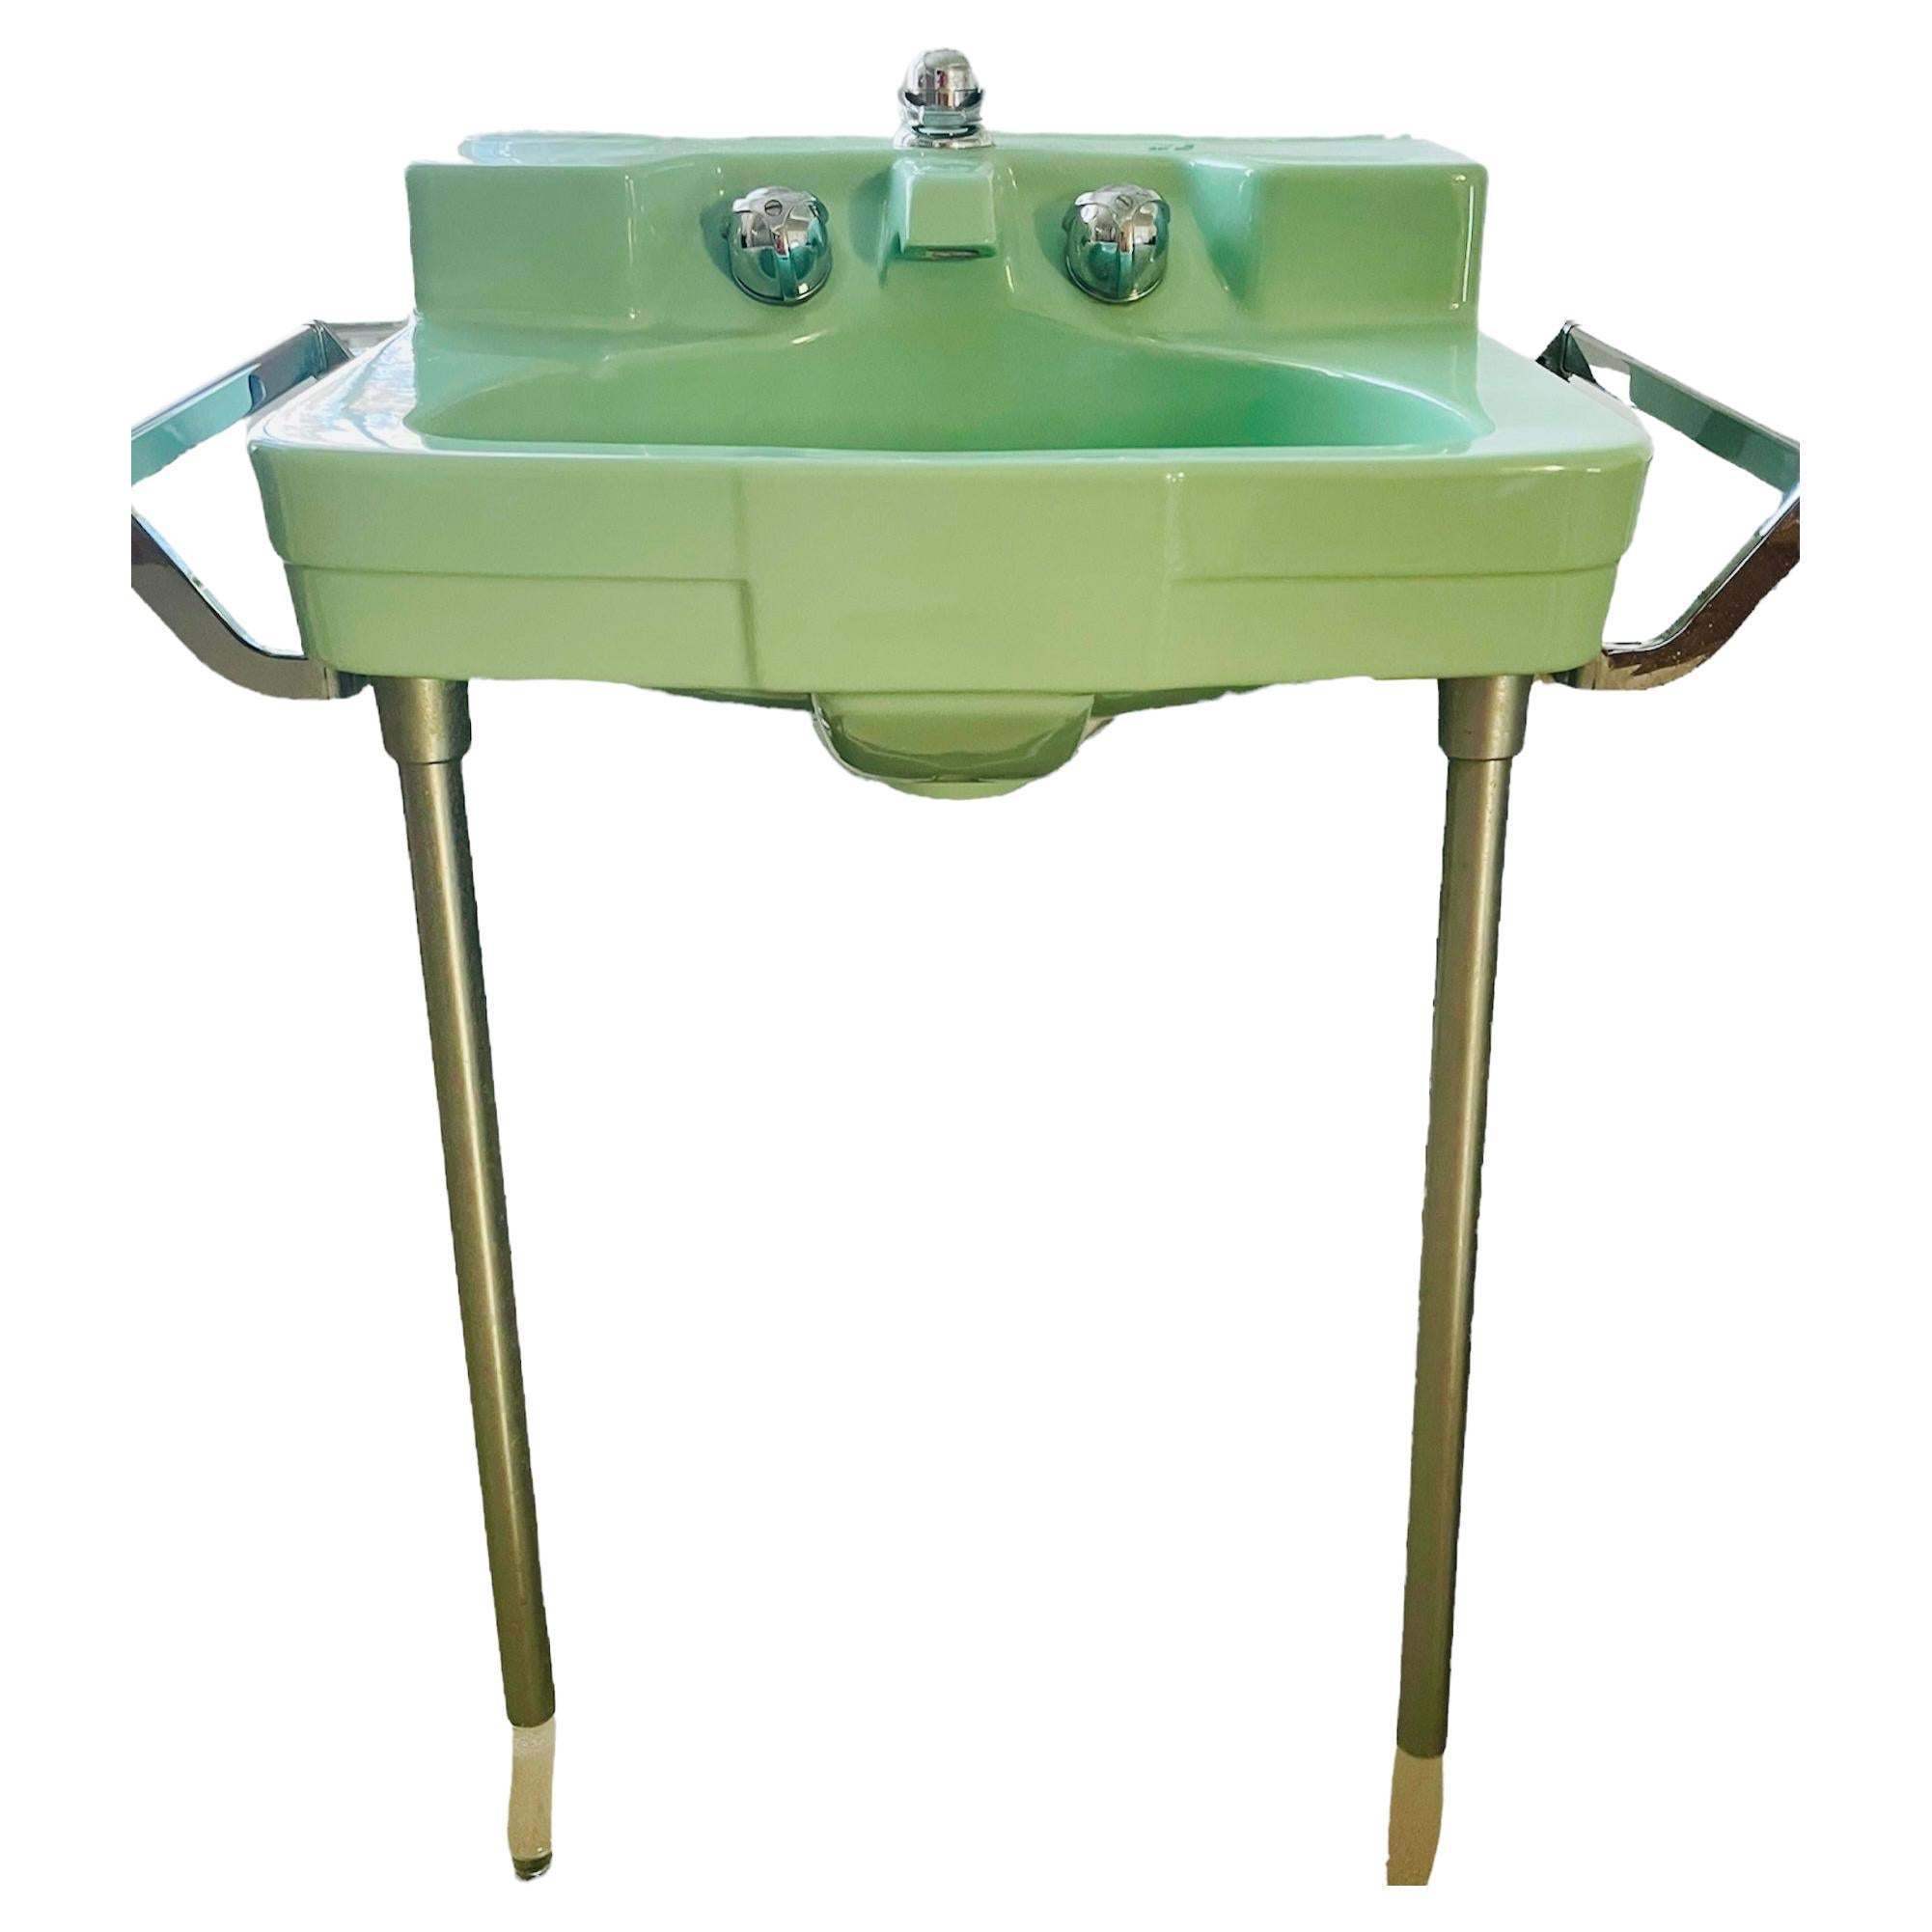 Stunning Crane “Drexel” Sink in Jade, Featuring Chrome Towel Bars and Legs